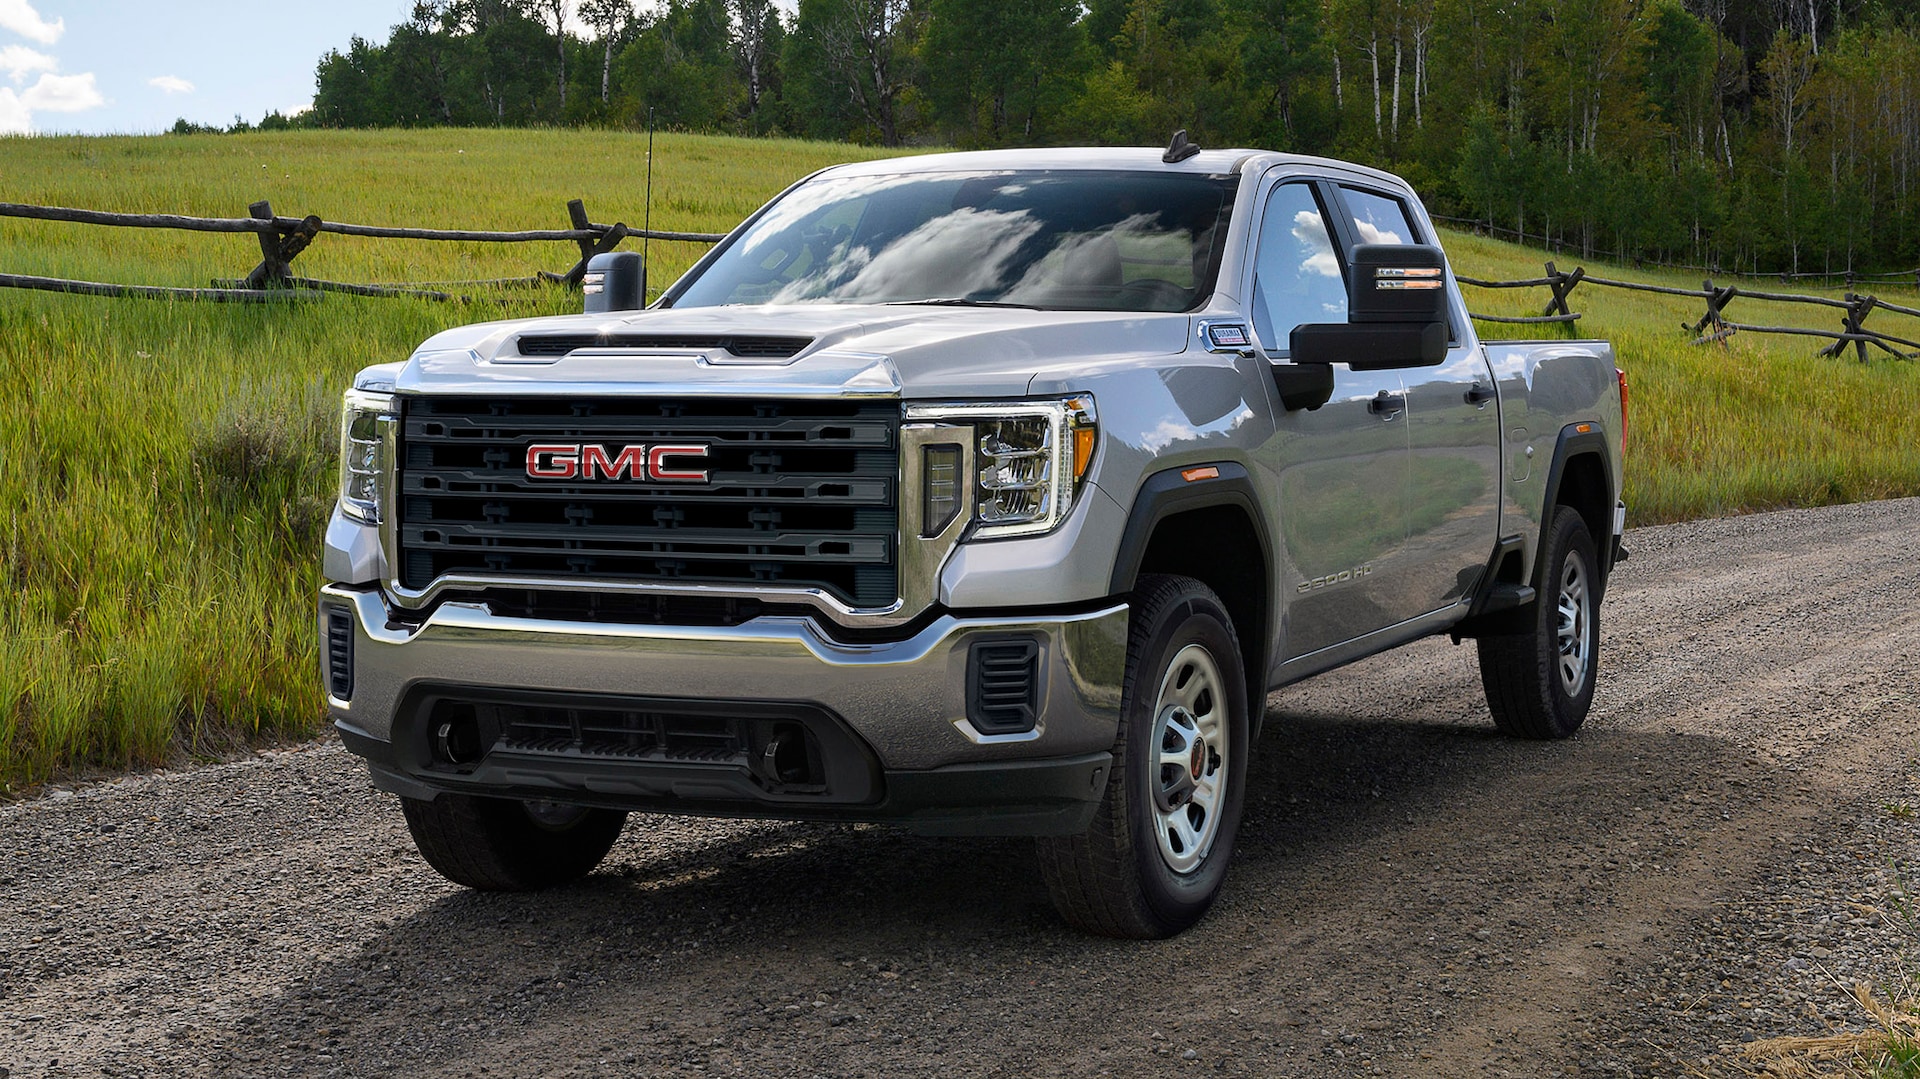 2021 GMC Sierra 2500HD Prices, Reviews, and Photos - MotorTrend